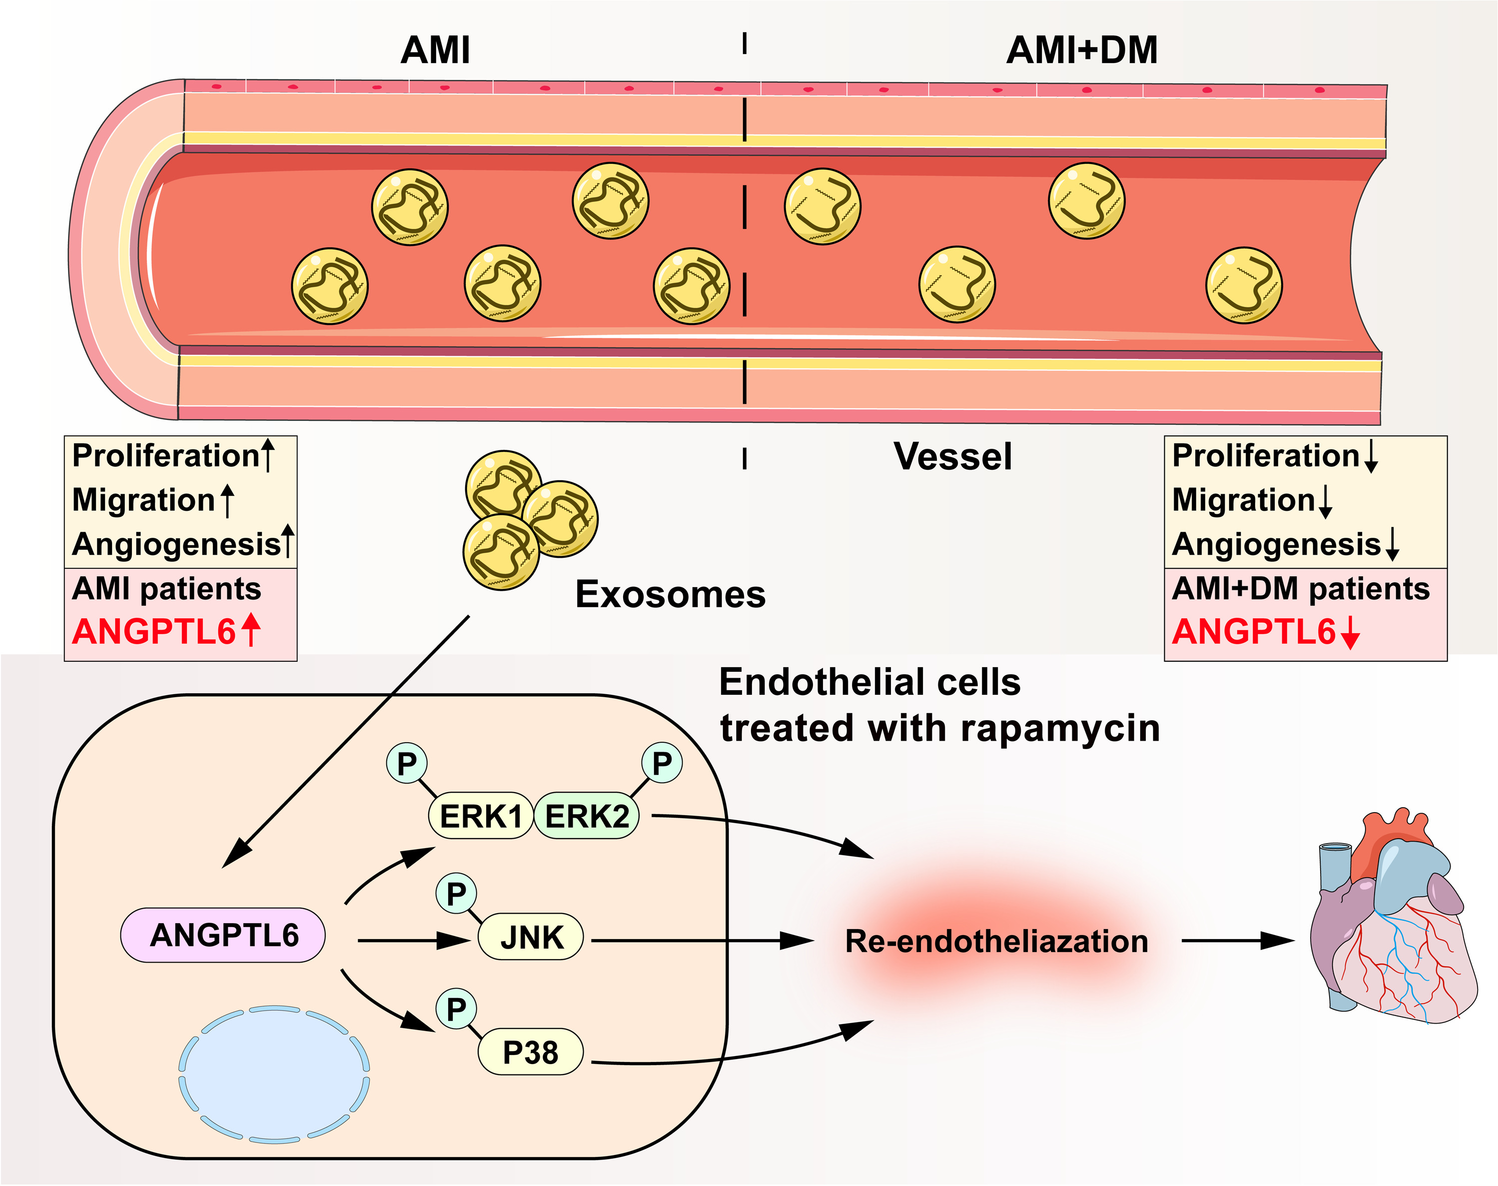 Differential Proteomic Profiles of Coronary Serum Exosomes in Acute Myocardial Infarction Patients with or Without Diabetes Mellitus: ANGPTL6 Accelerates Regeneration of Endothelial Cells Treated with Rapamycin via MAPK Pathways